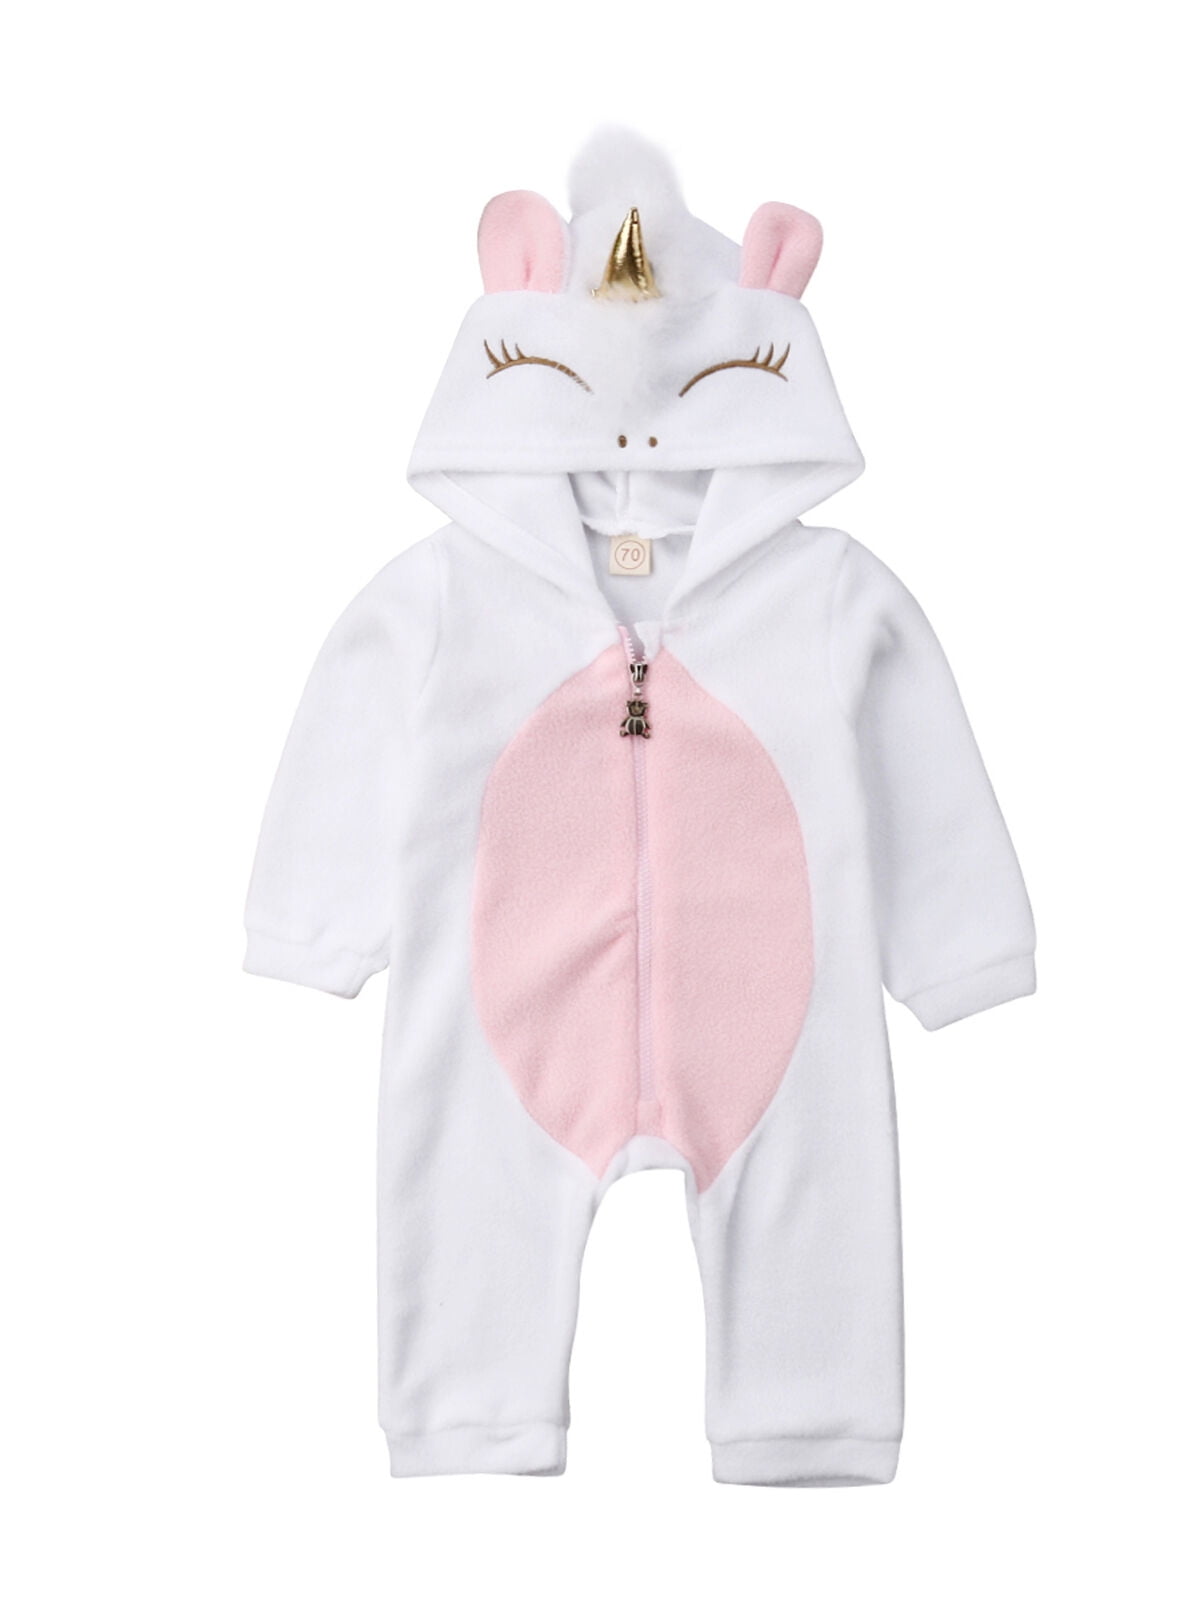 Boho baby clothes Baby romper Baby coming home Baby warm hooded overalls with zipper Baby glam romper Warm newborn girl